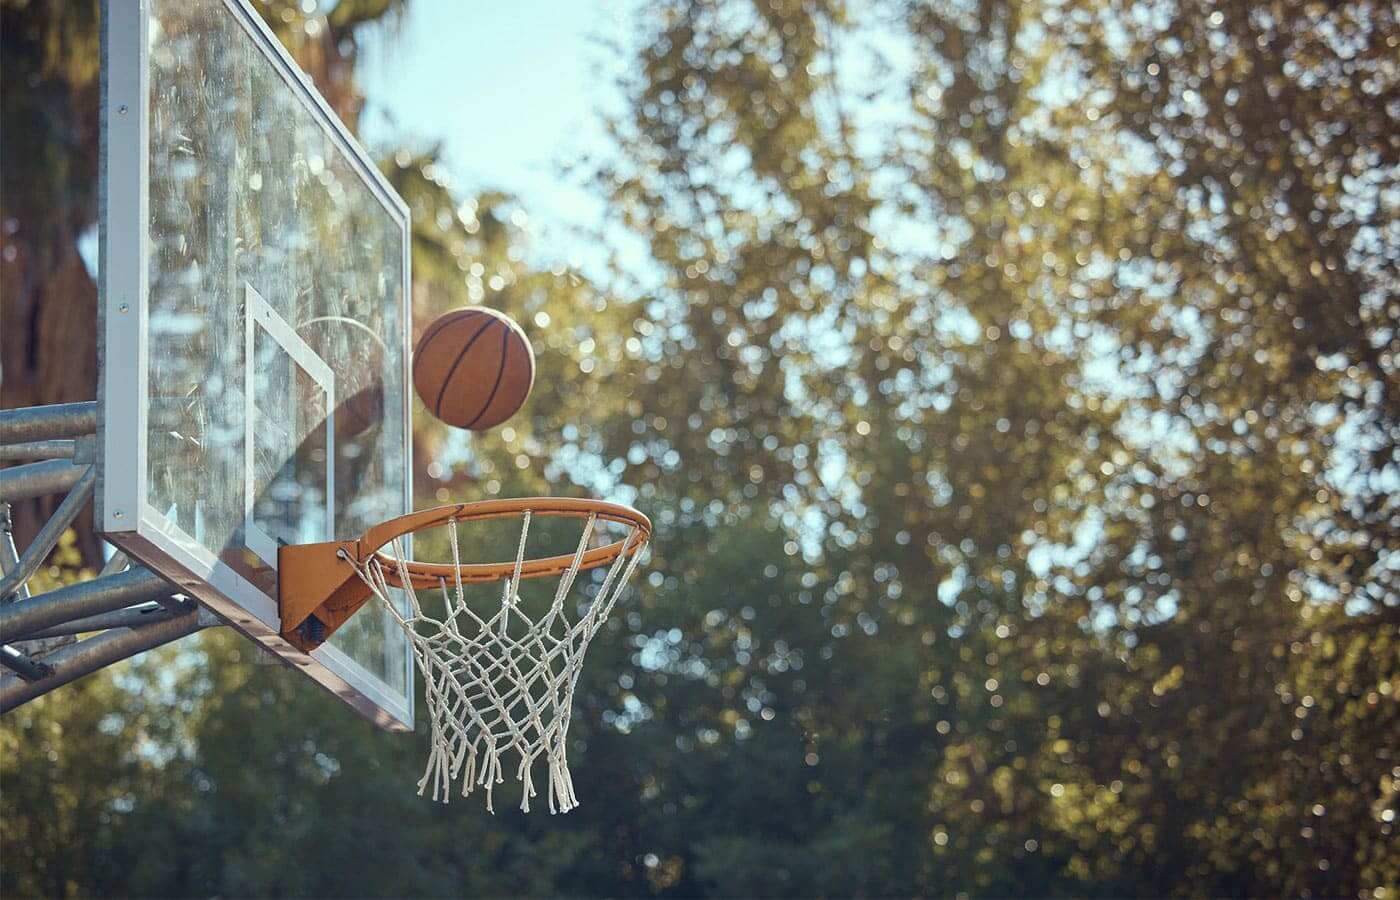 A basketball being thrown at a hoop during a sunny day